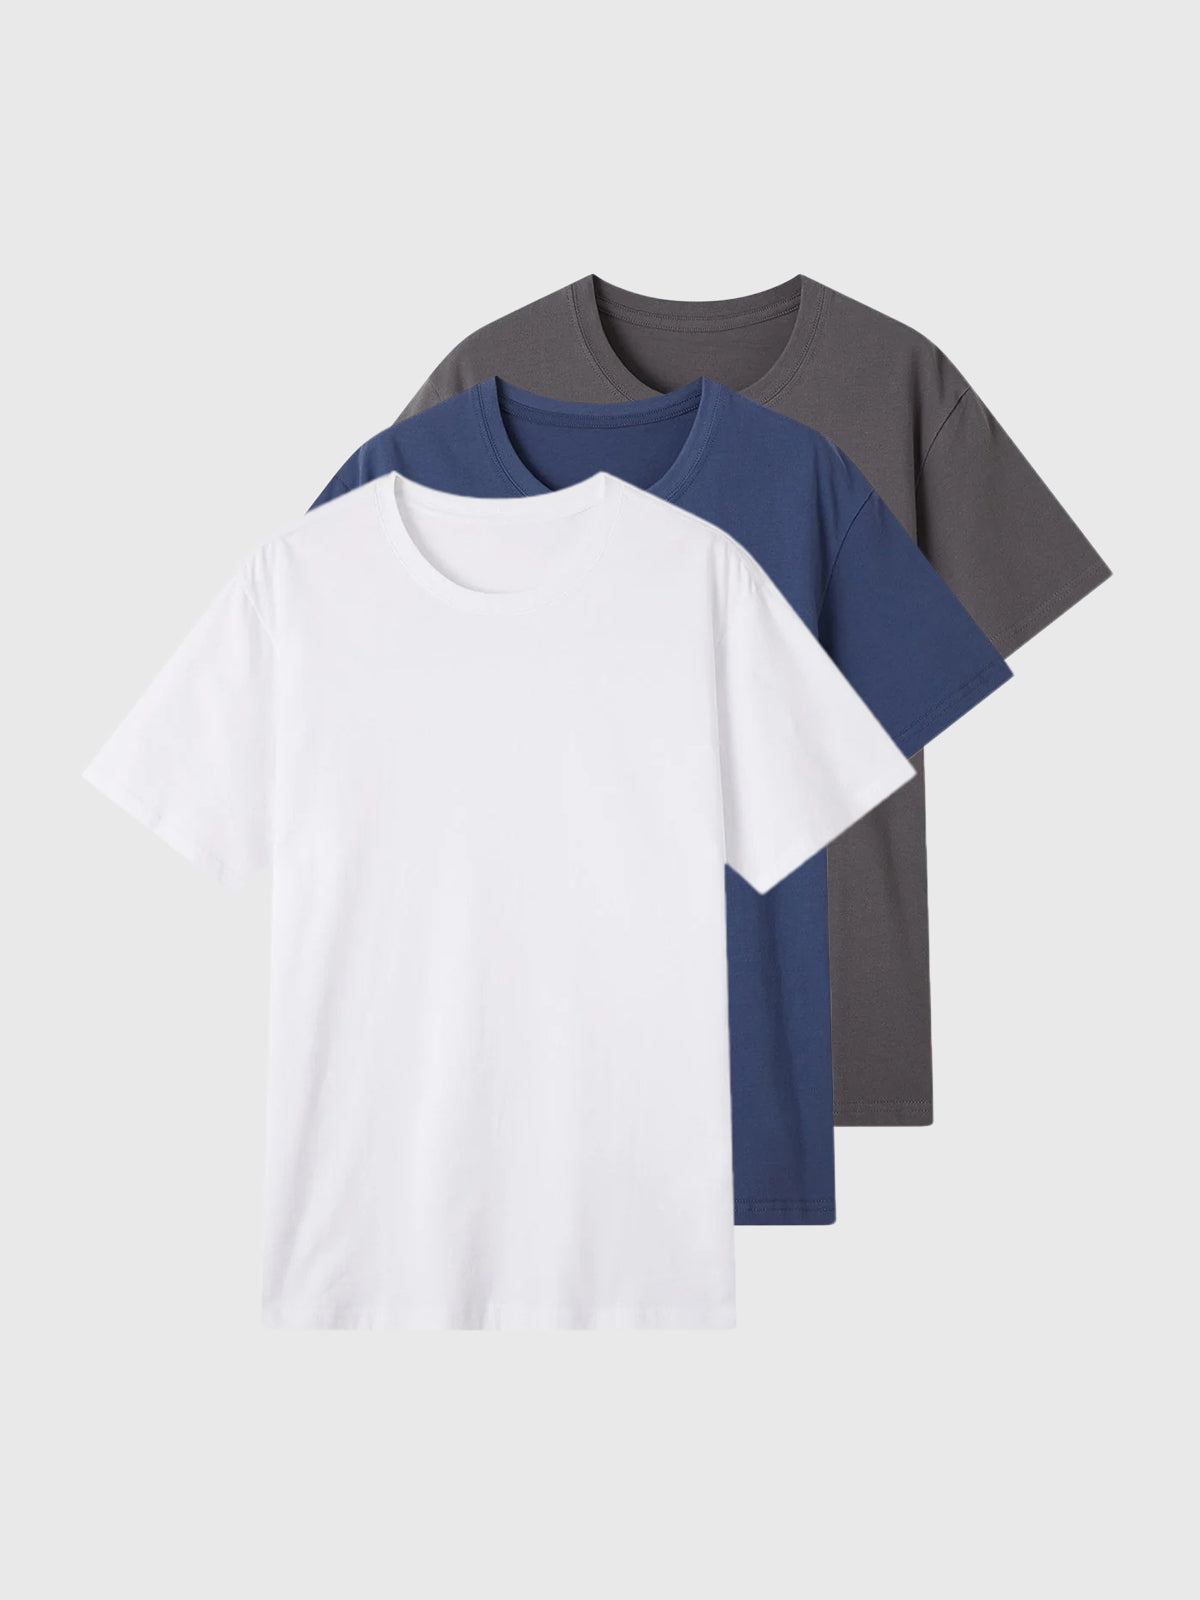 3-Pack Chroma Tees Crew Neck Cotton Basic T-shirts | Ahaselected